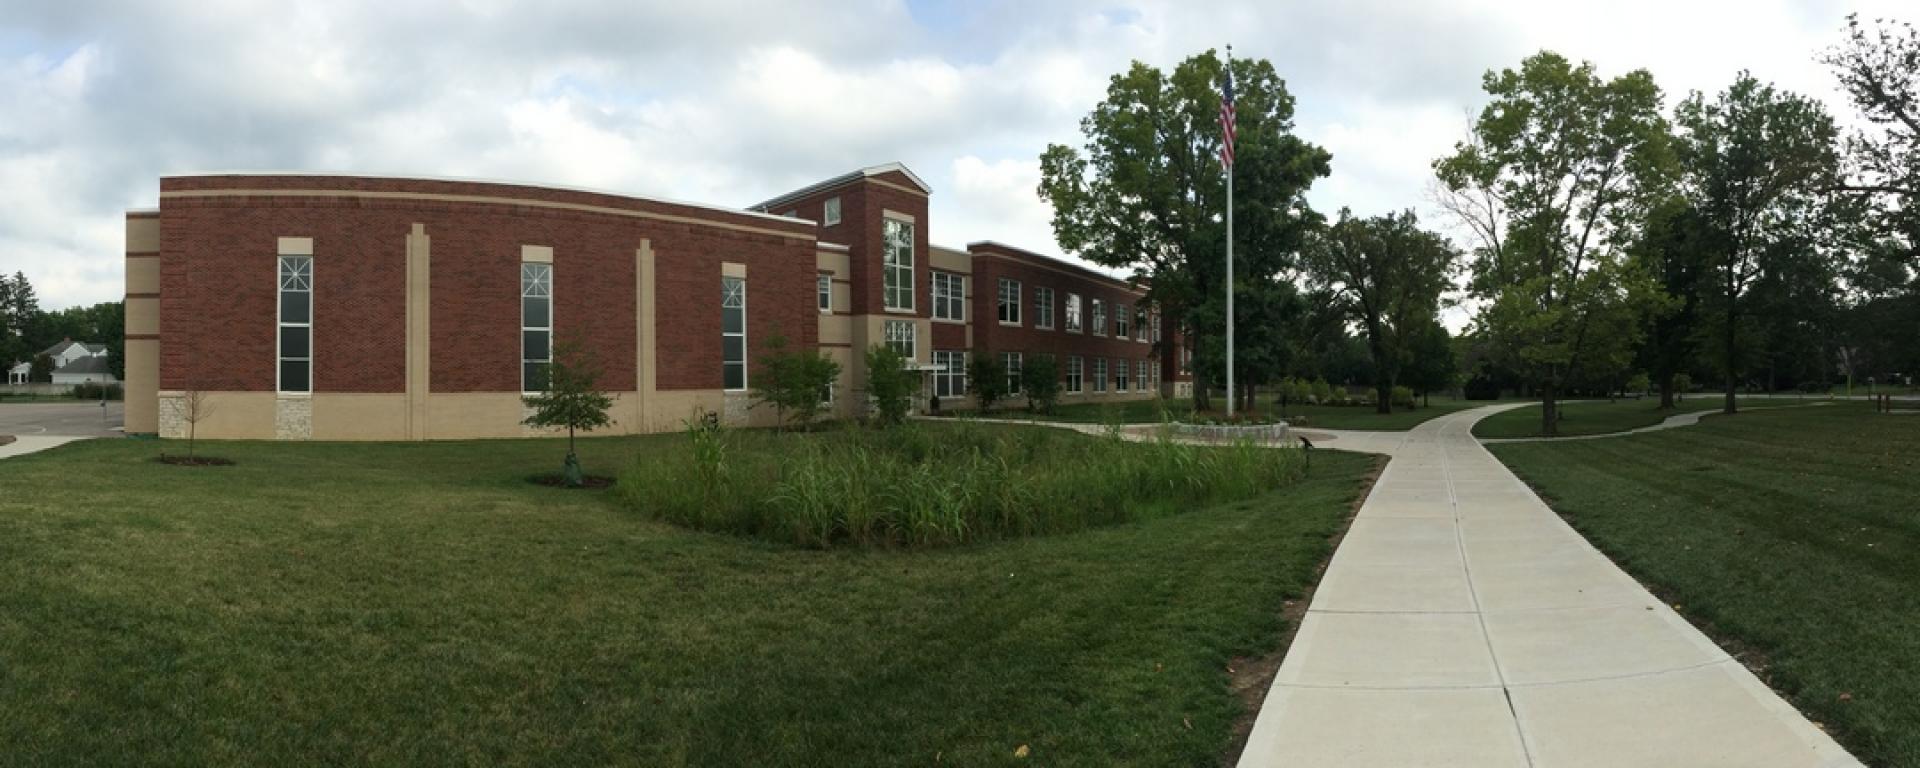 Terrace Park Elementary Learning Campus Bayer Becker Civil